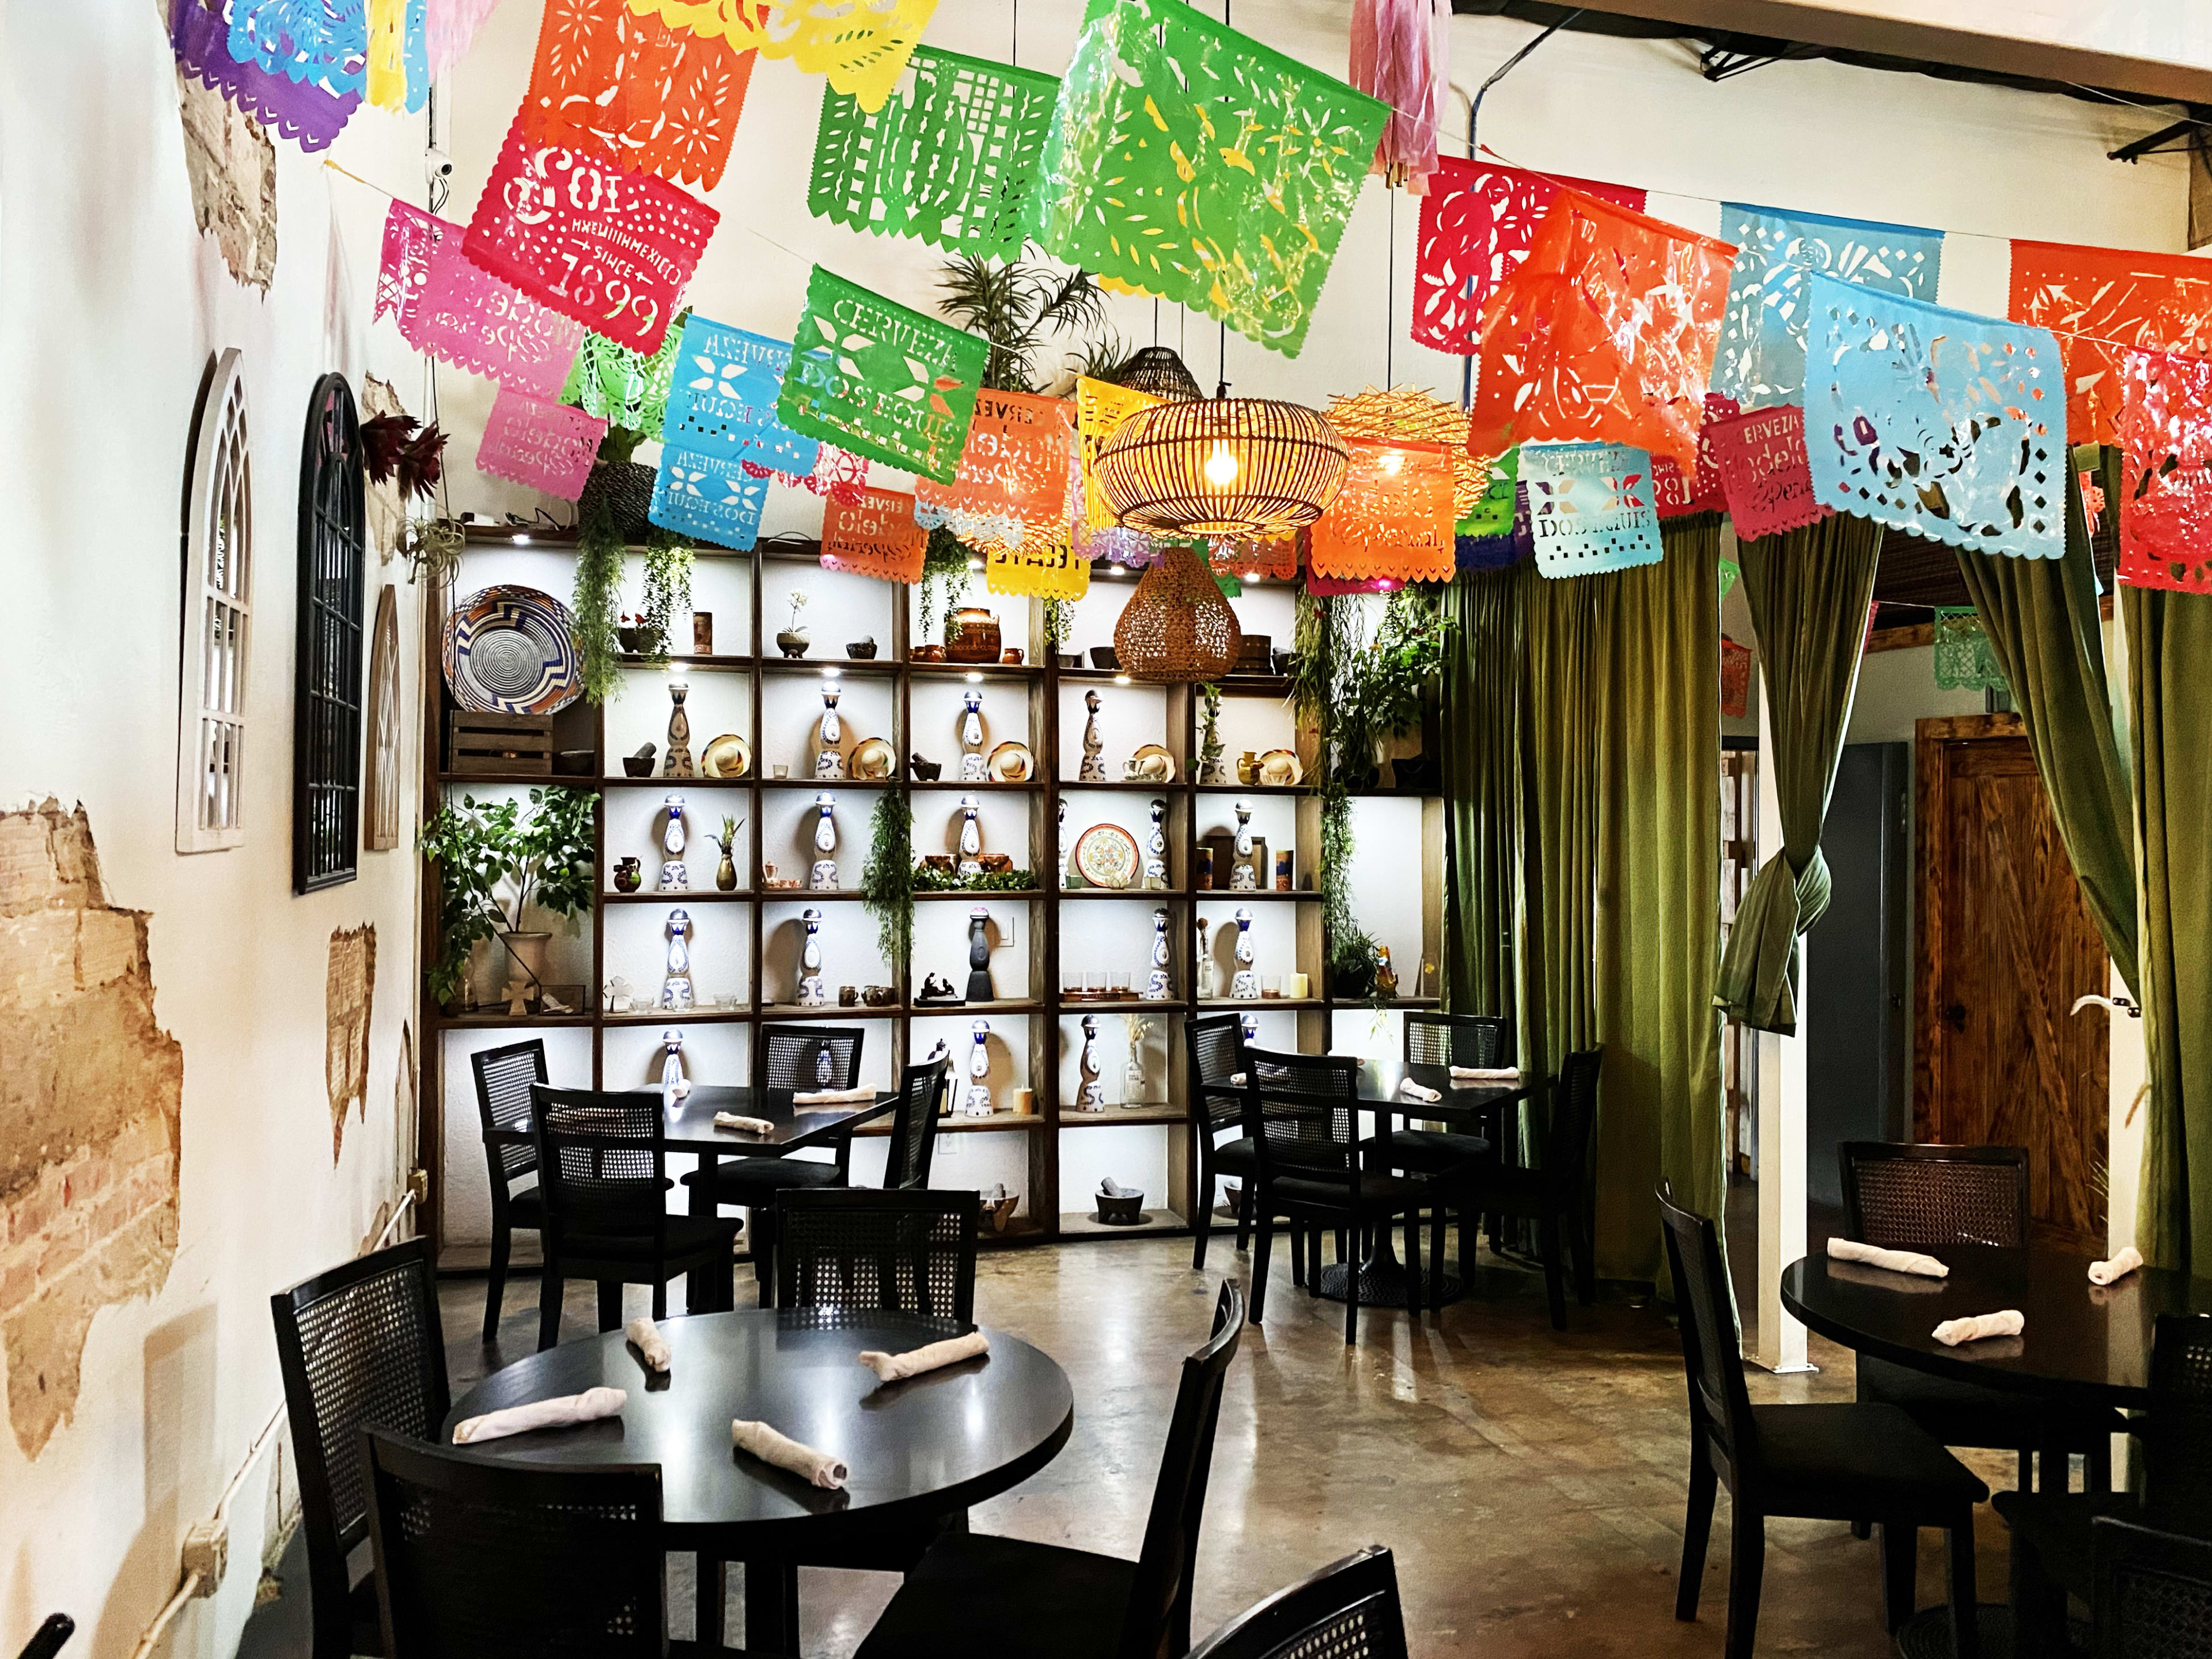 The Best Mexican Restaurants In Dallas image